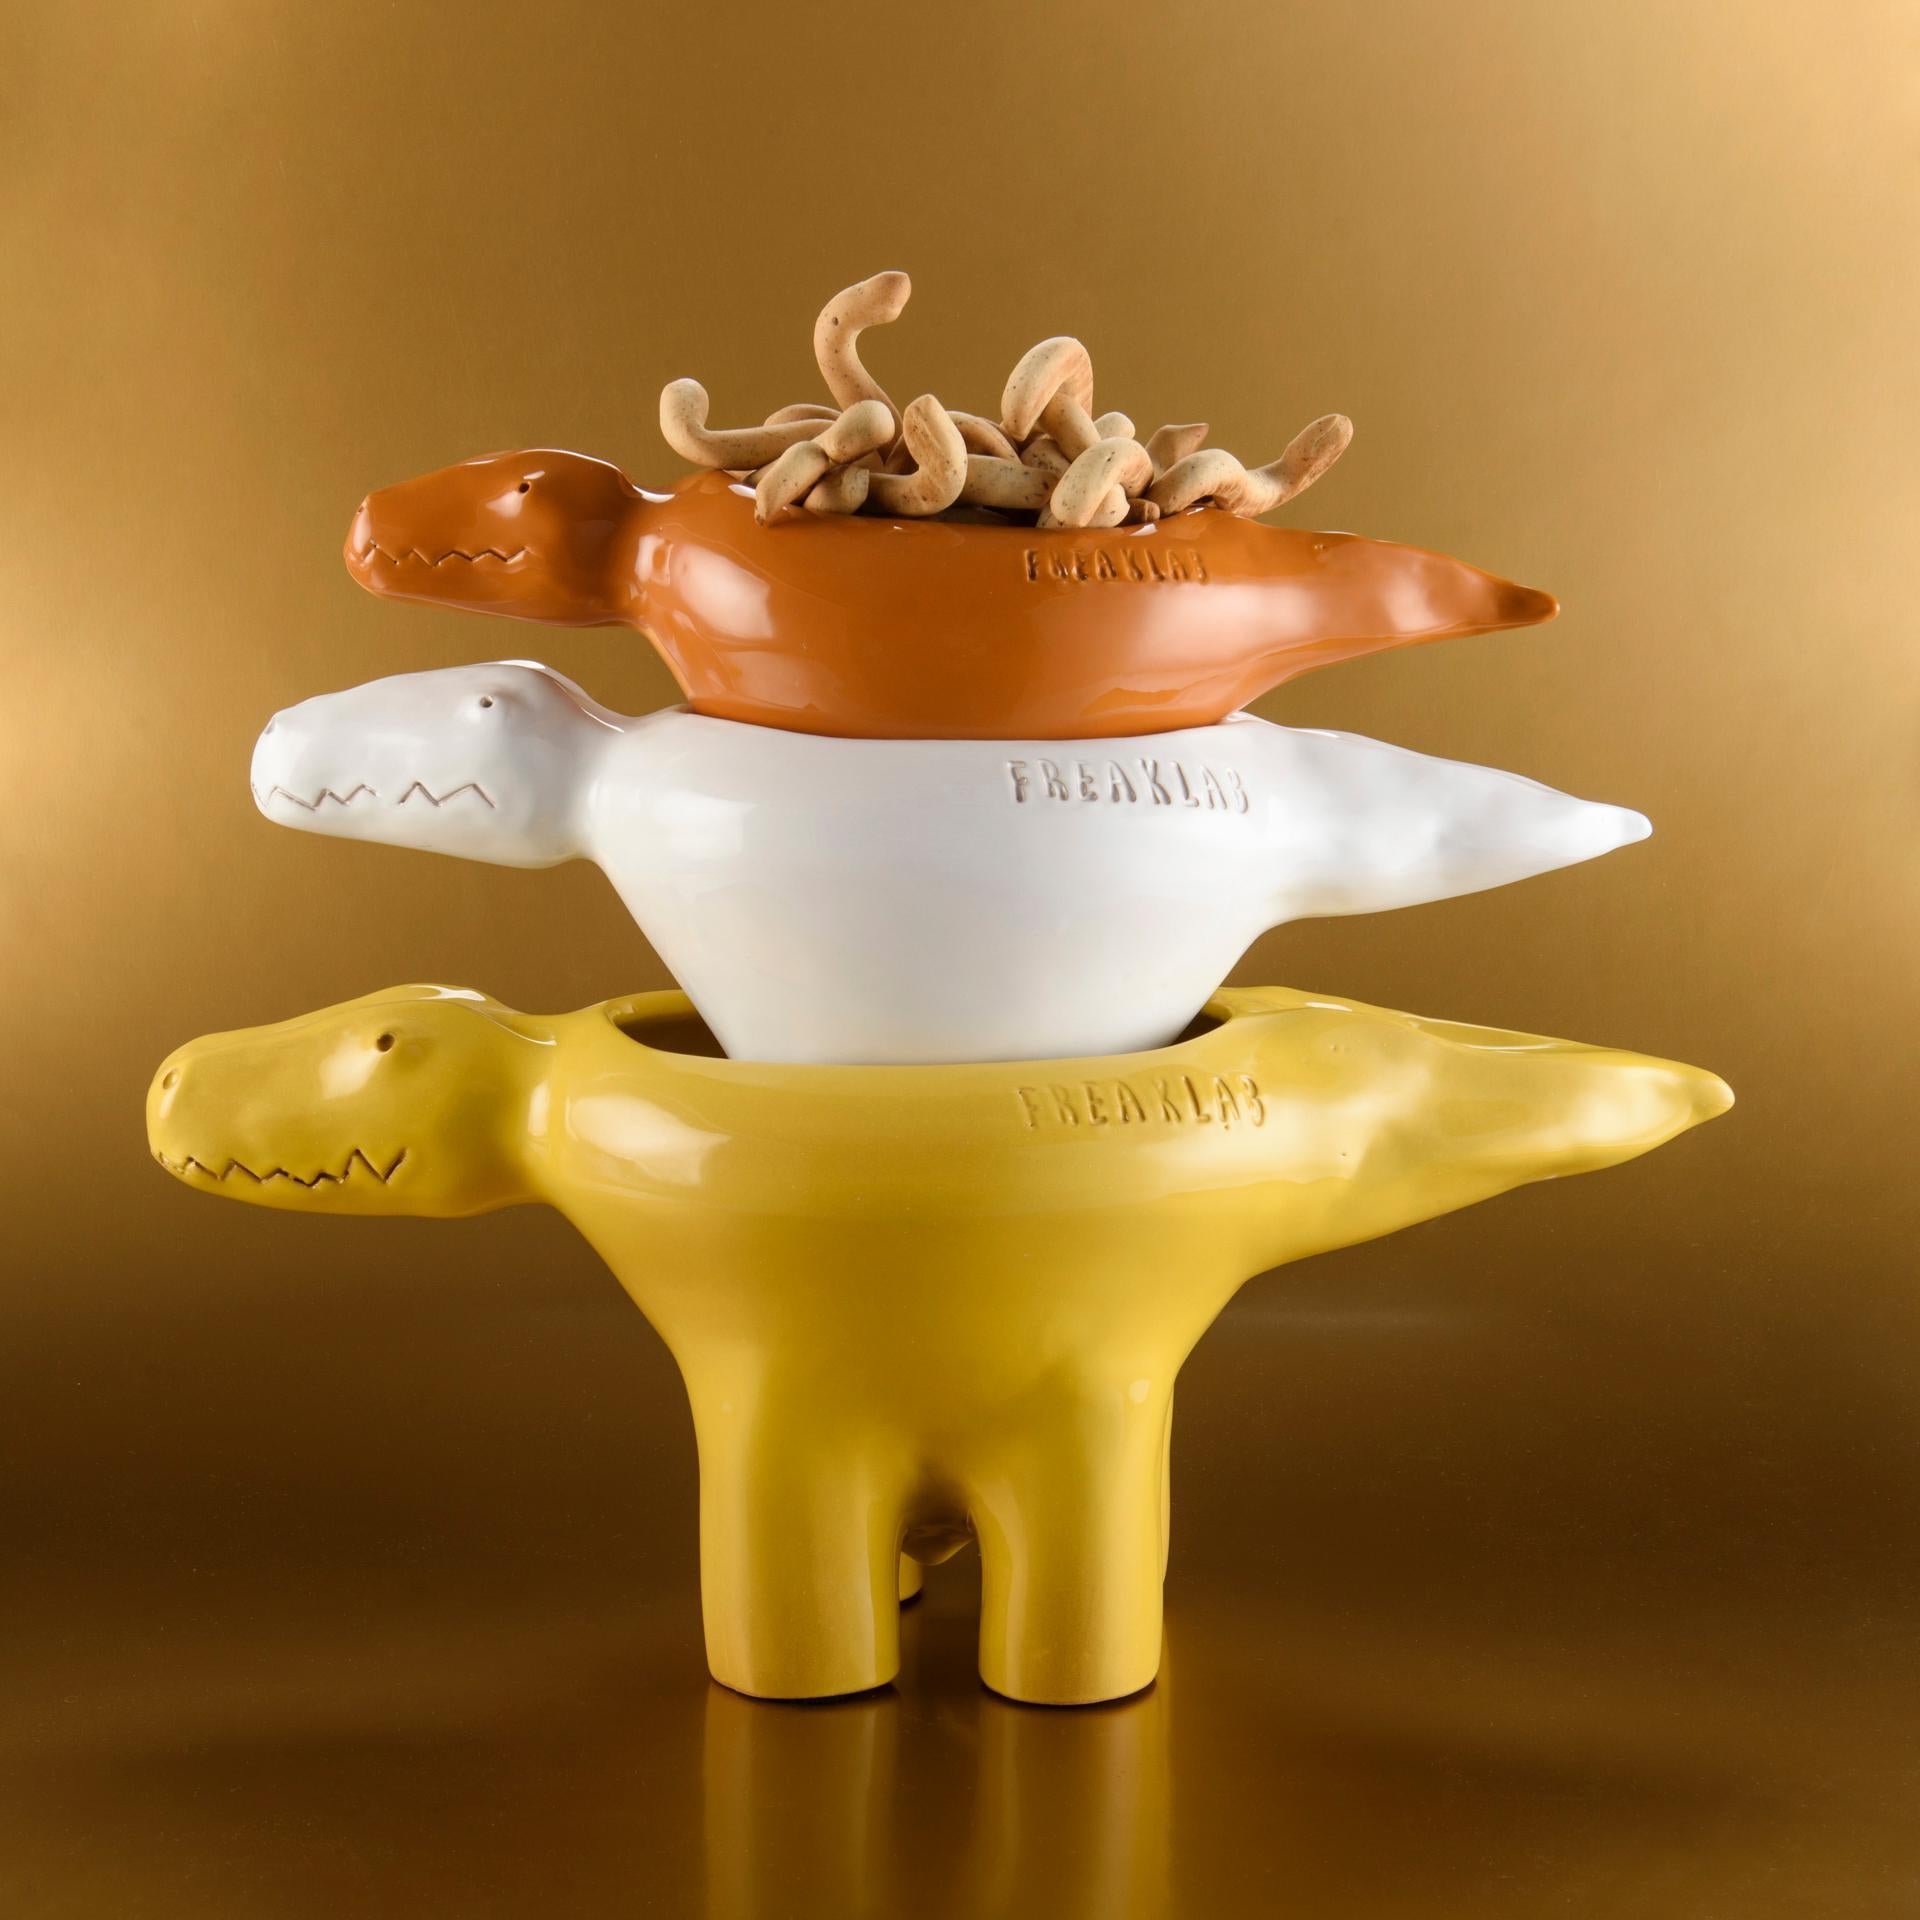 Freaklab Cocodrile Bowl Large Made Entirely by Hand in Ceramic In New Condition For Sale In Modica, RG